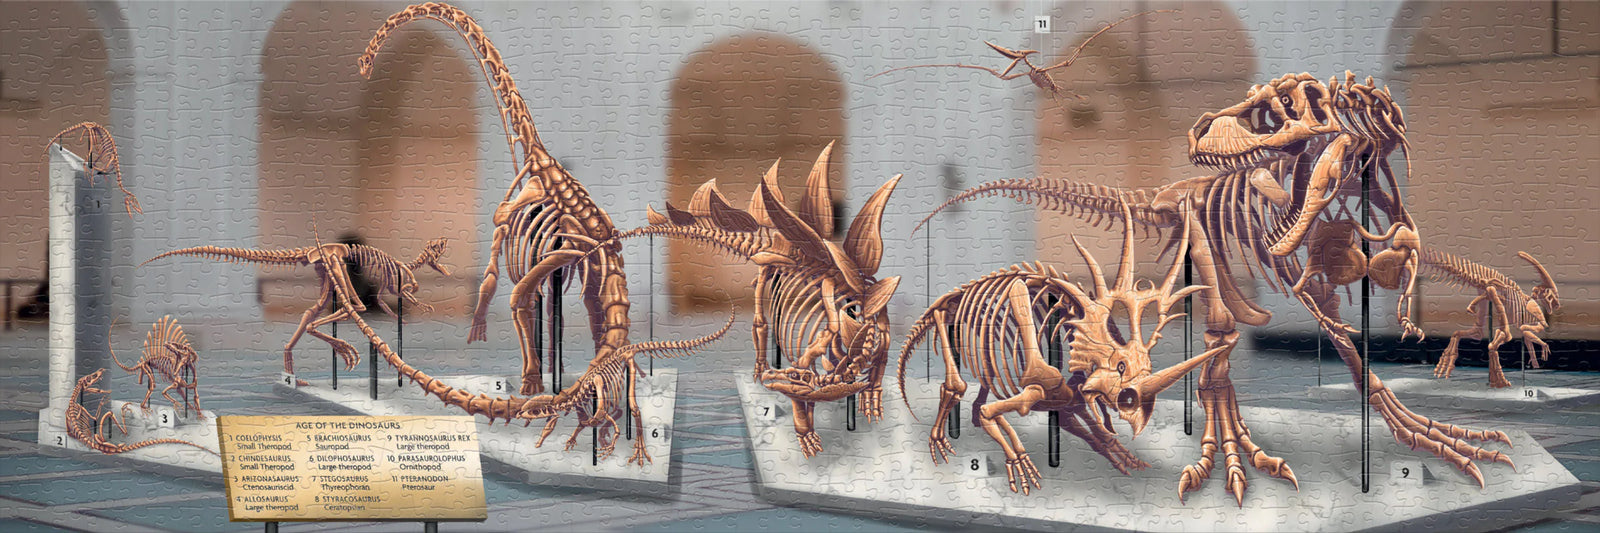 age-of-the-dinosaurs-jigsaw-puzzle-2